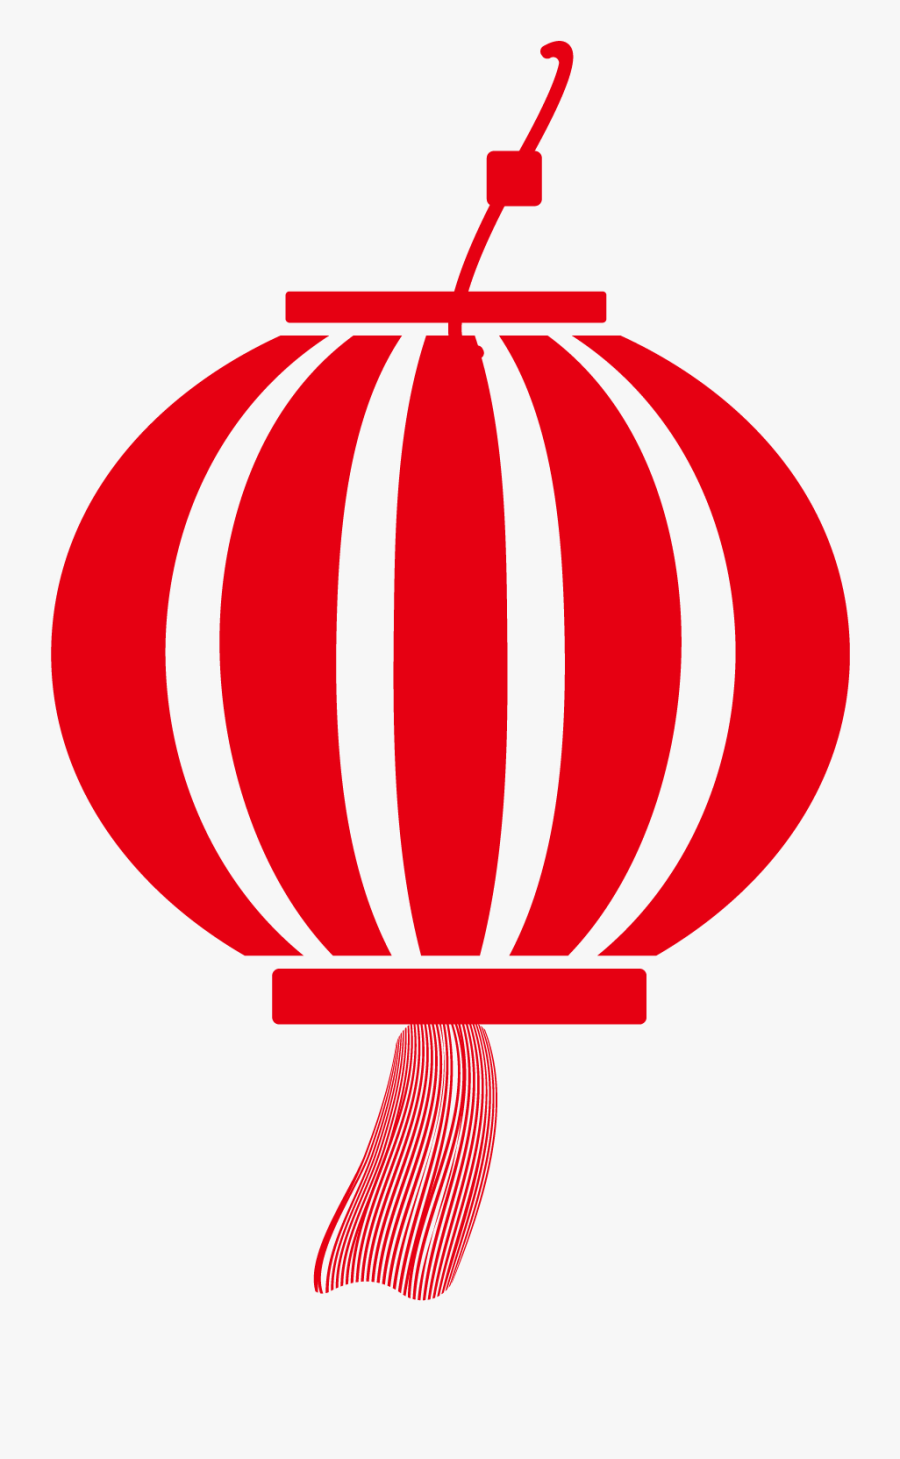 Red Festive Lantern Original Png And Vector Image, Transparent Clipart